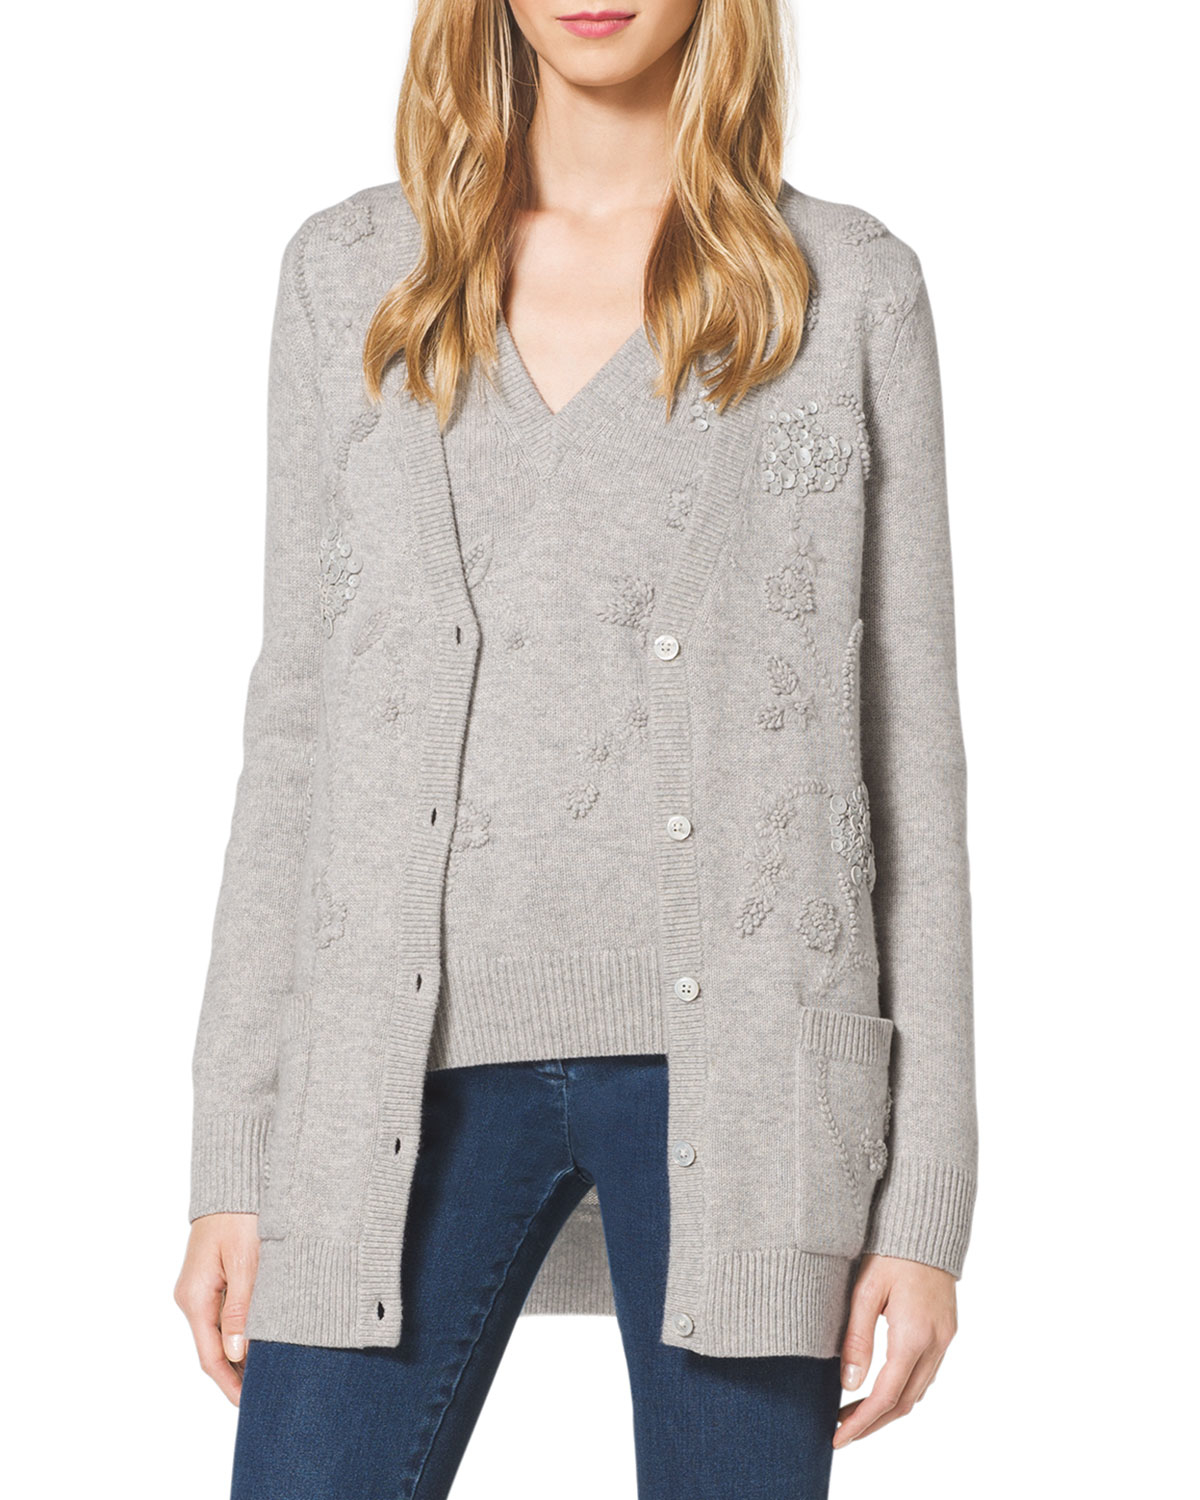 Michael Kors Embellished Cashmere Knit Cardigan in Gray - Lyst